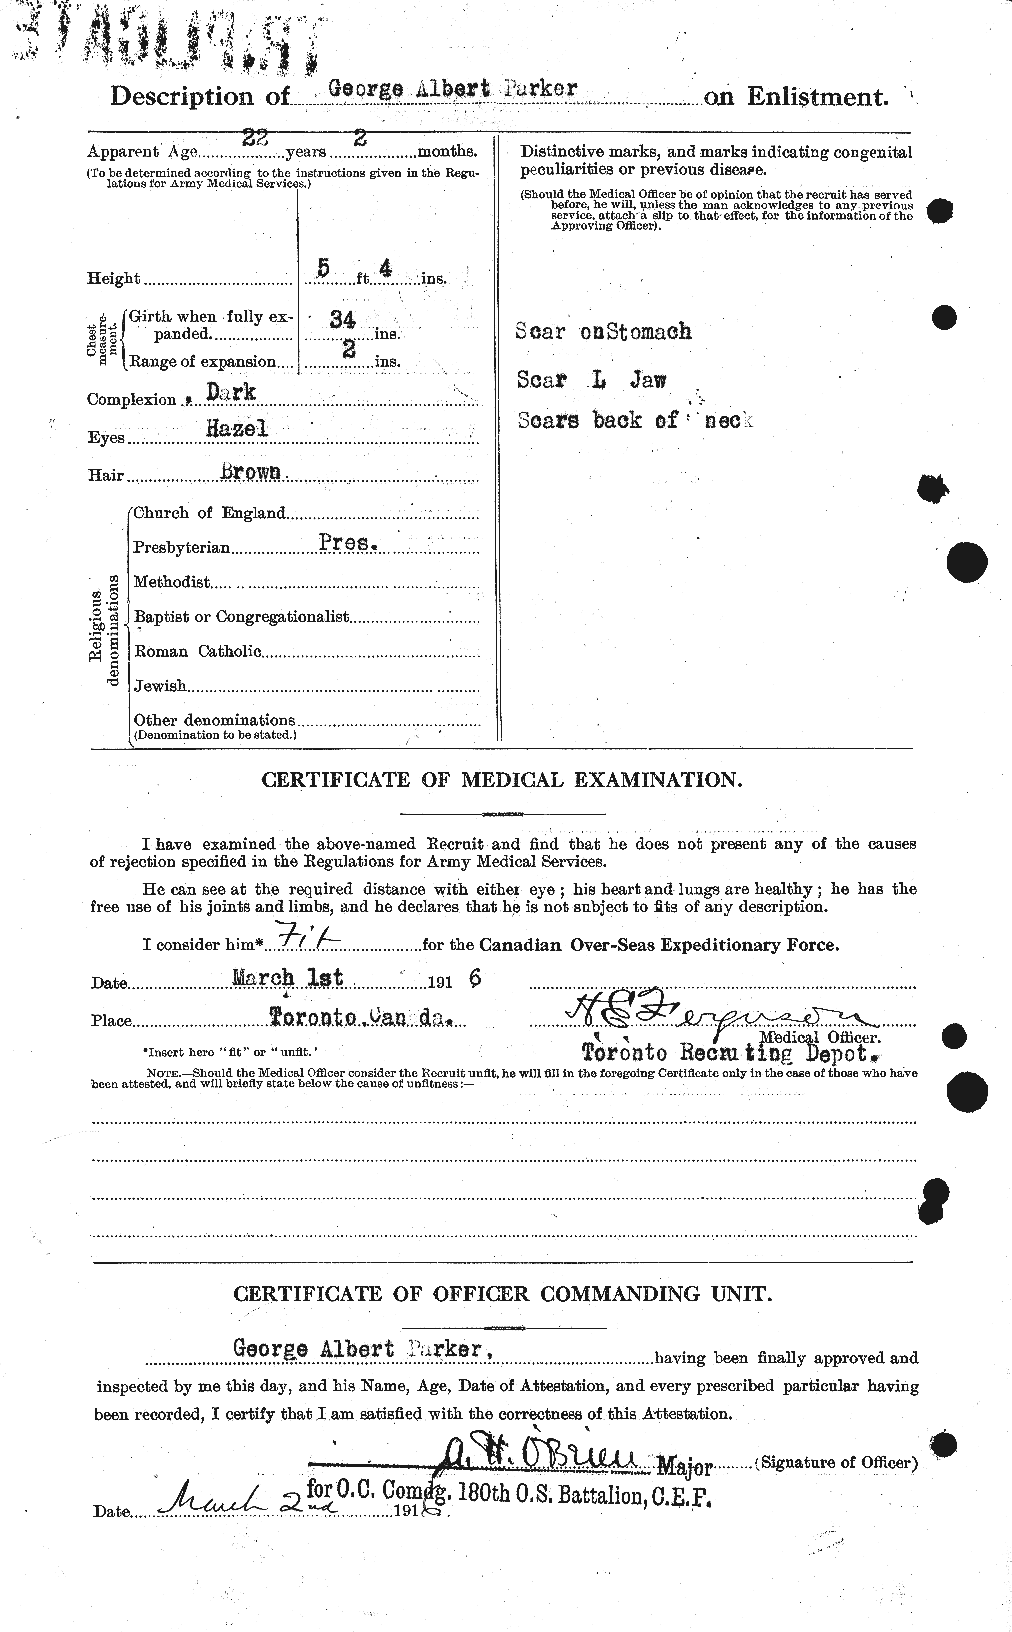 Personnel Records of the First World War - CEF 565251b